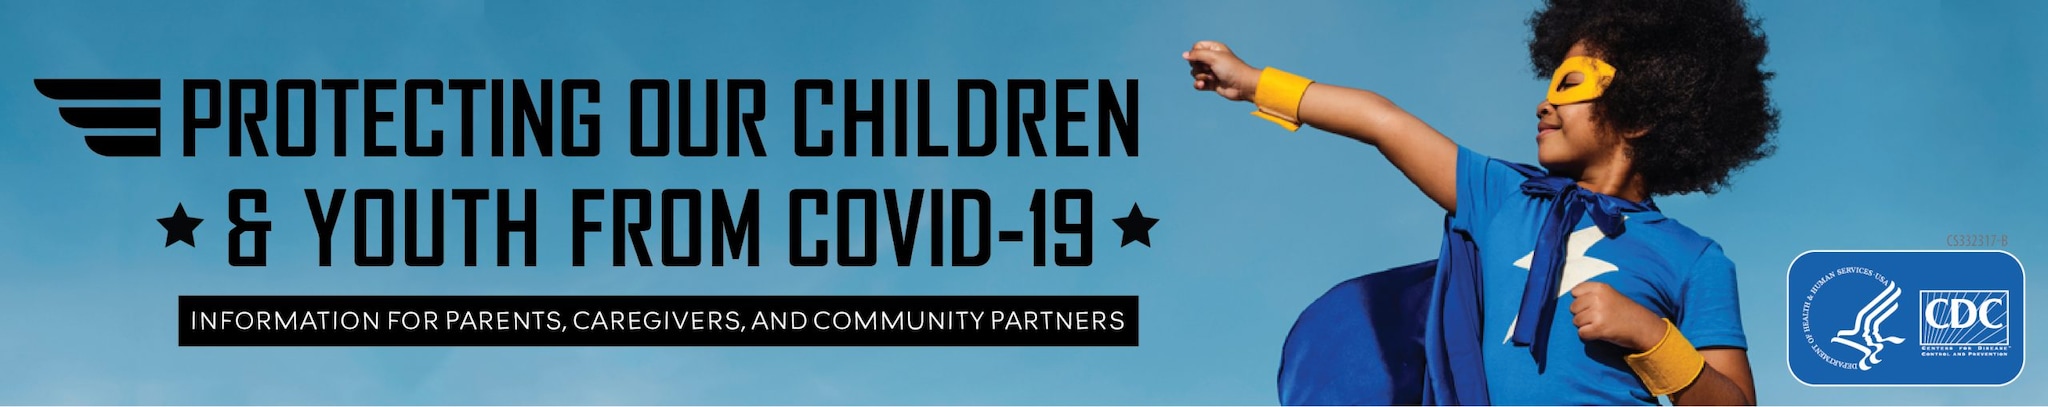 Decorative banner for Protecting Our Children and Youth from COVID-19 webinar